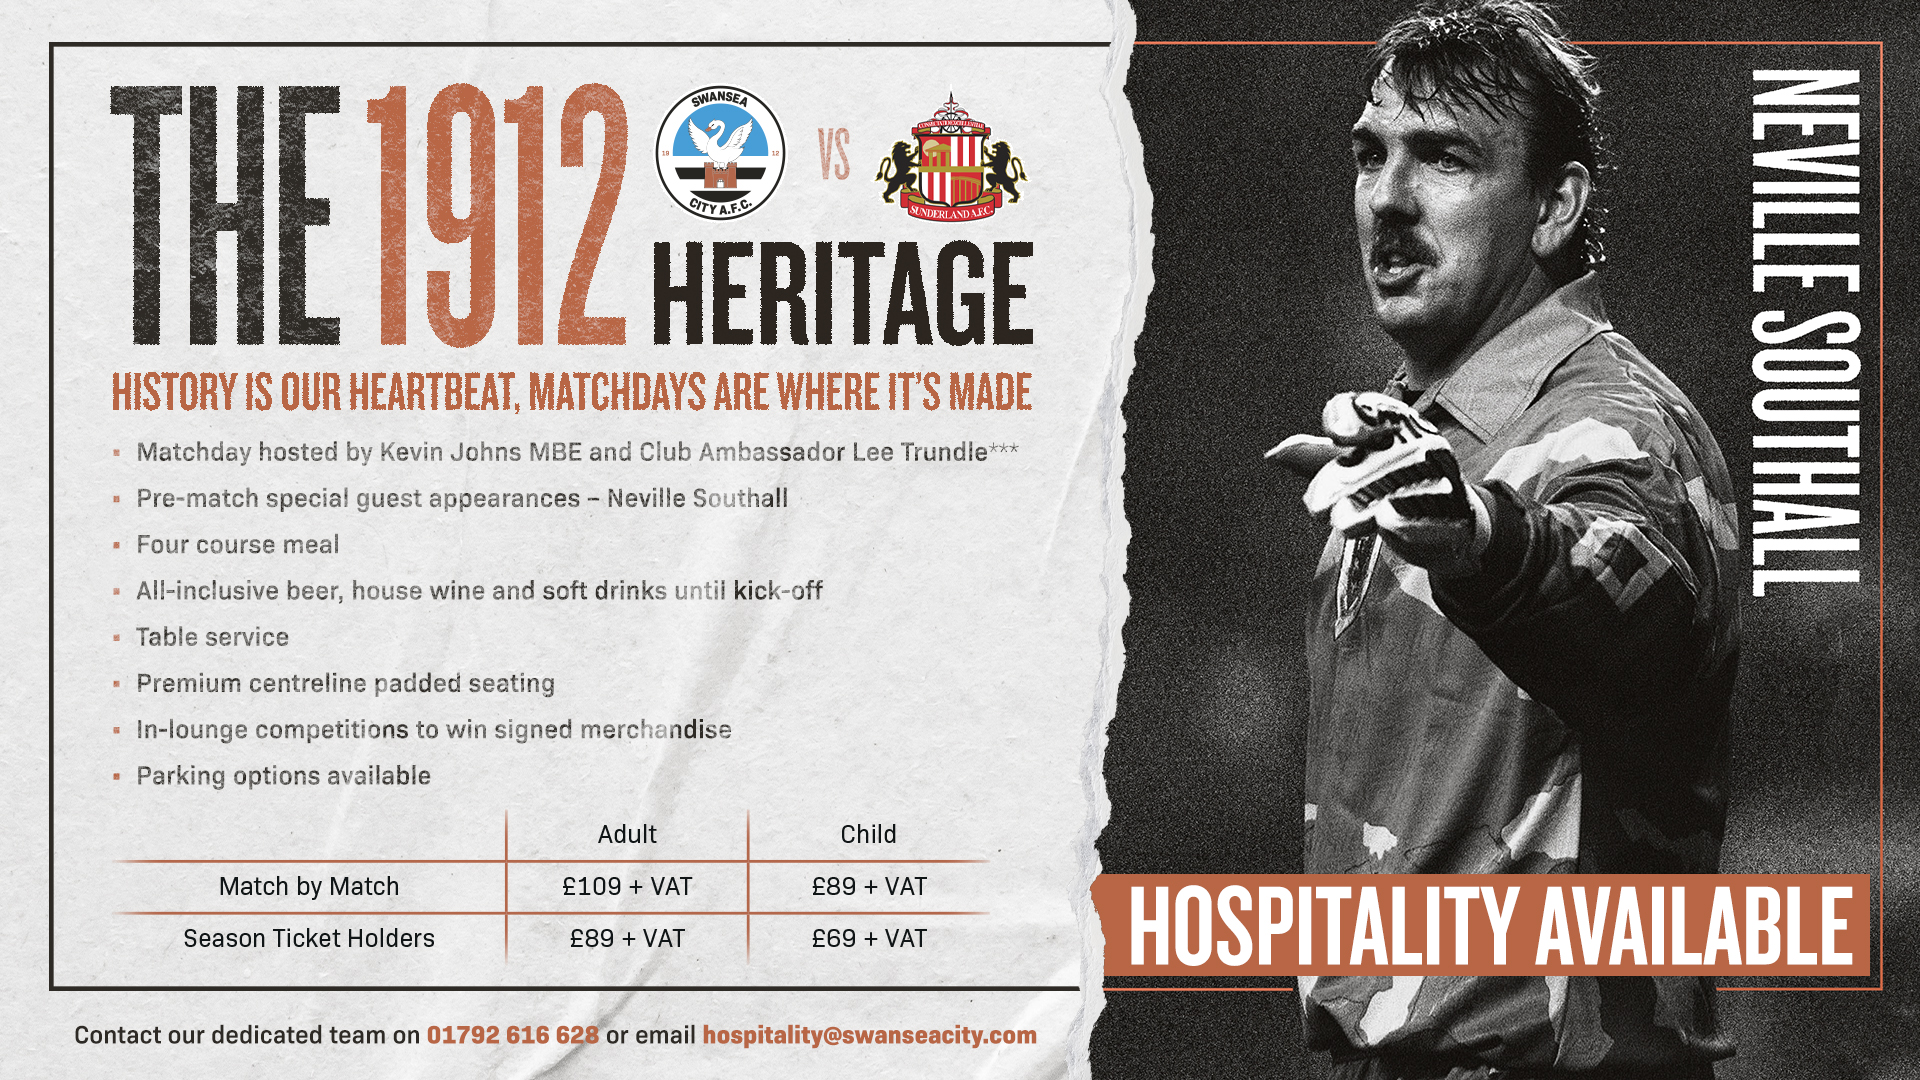 Neville Southall will be special guest in the 1912 Heritage Lounge on October 8